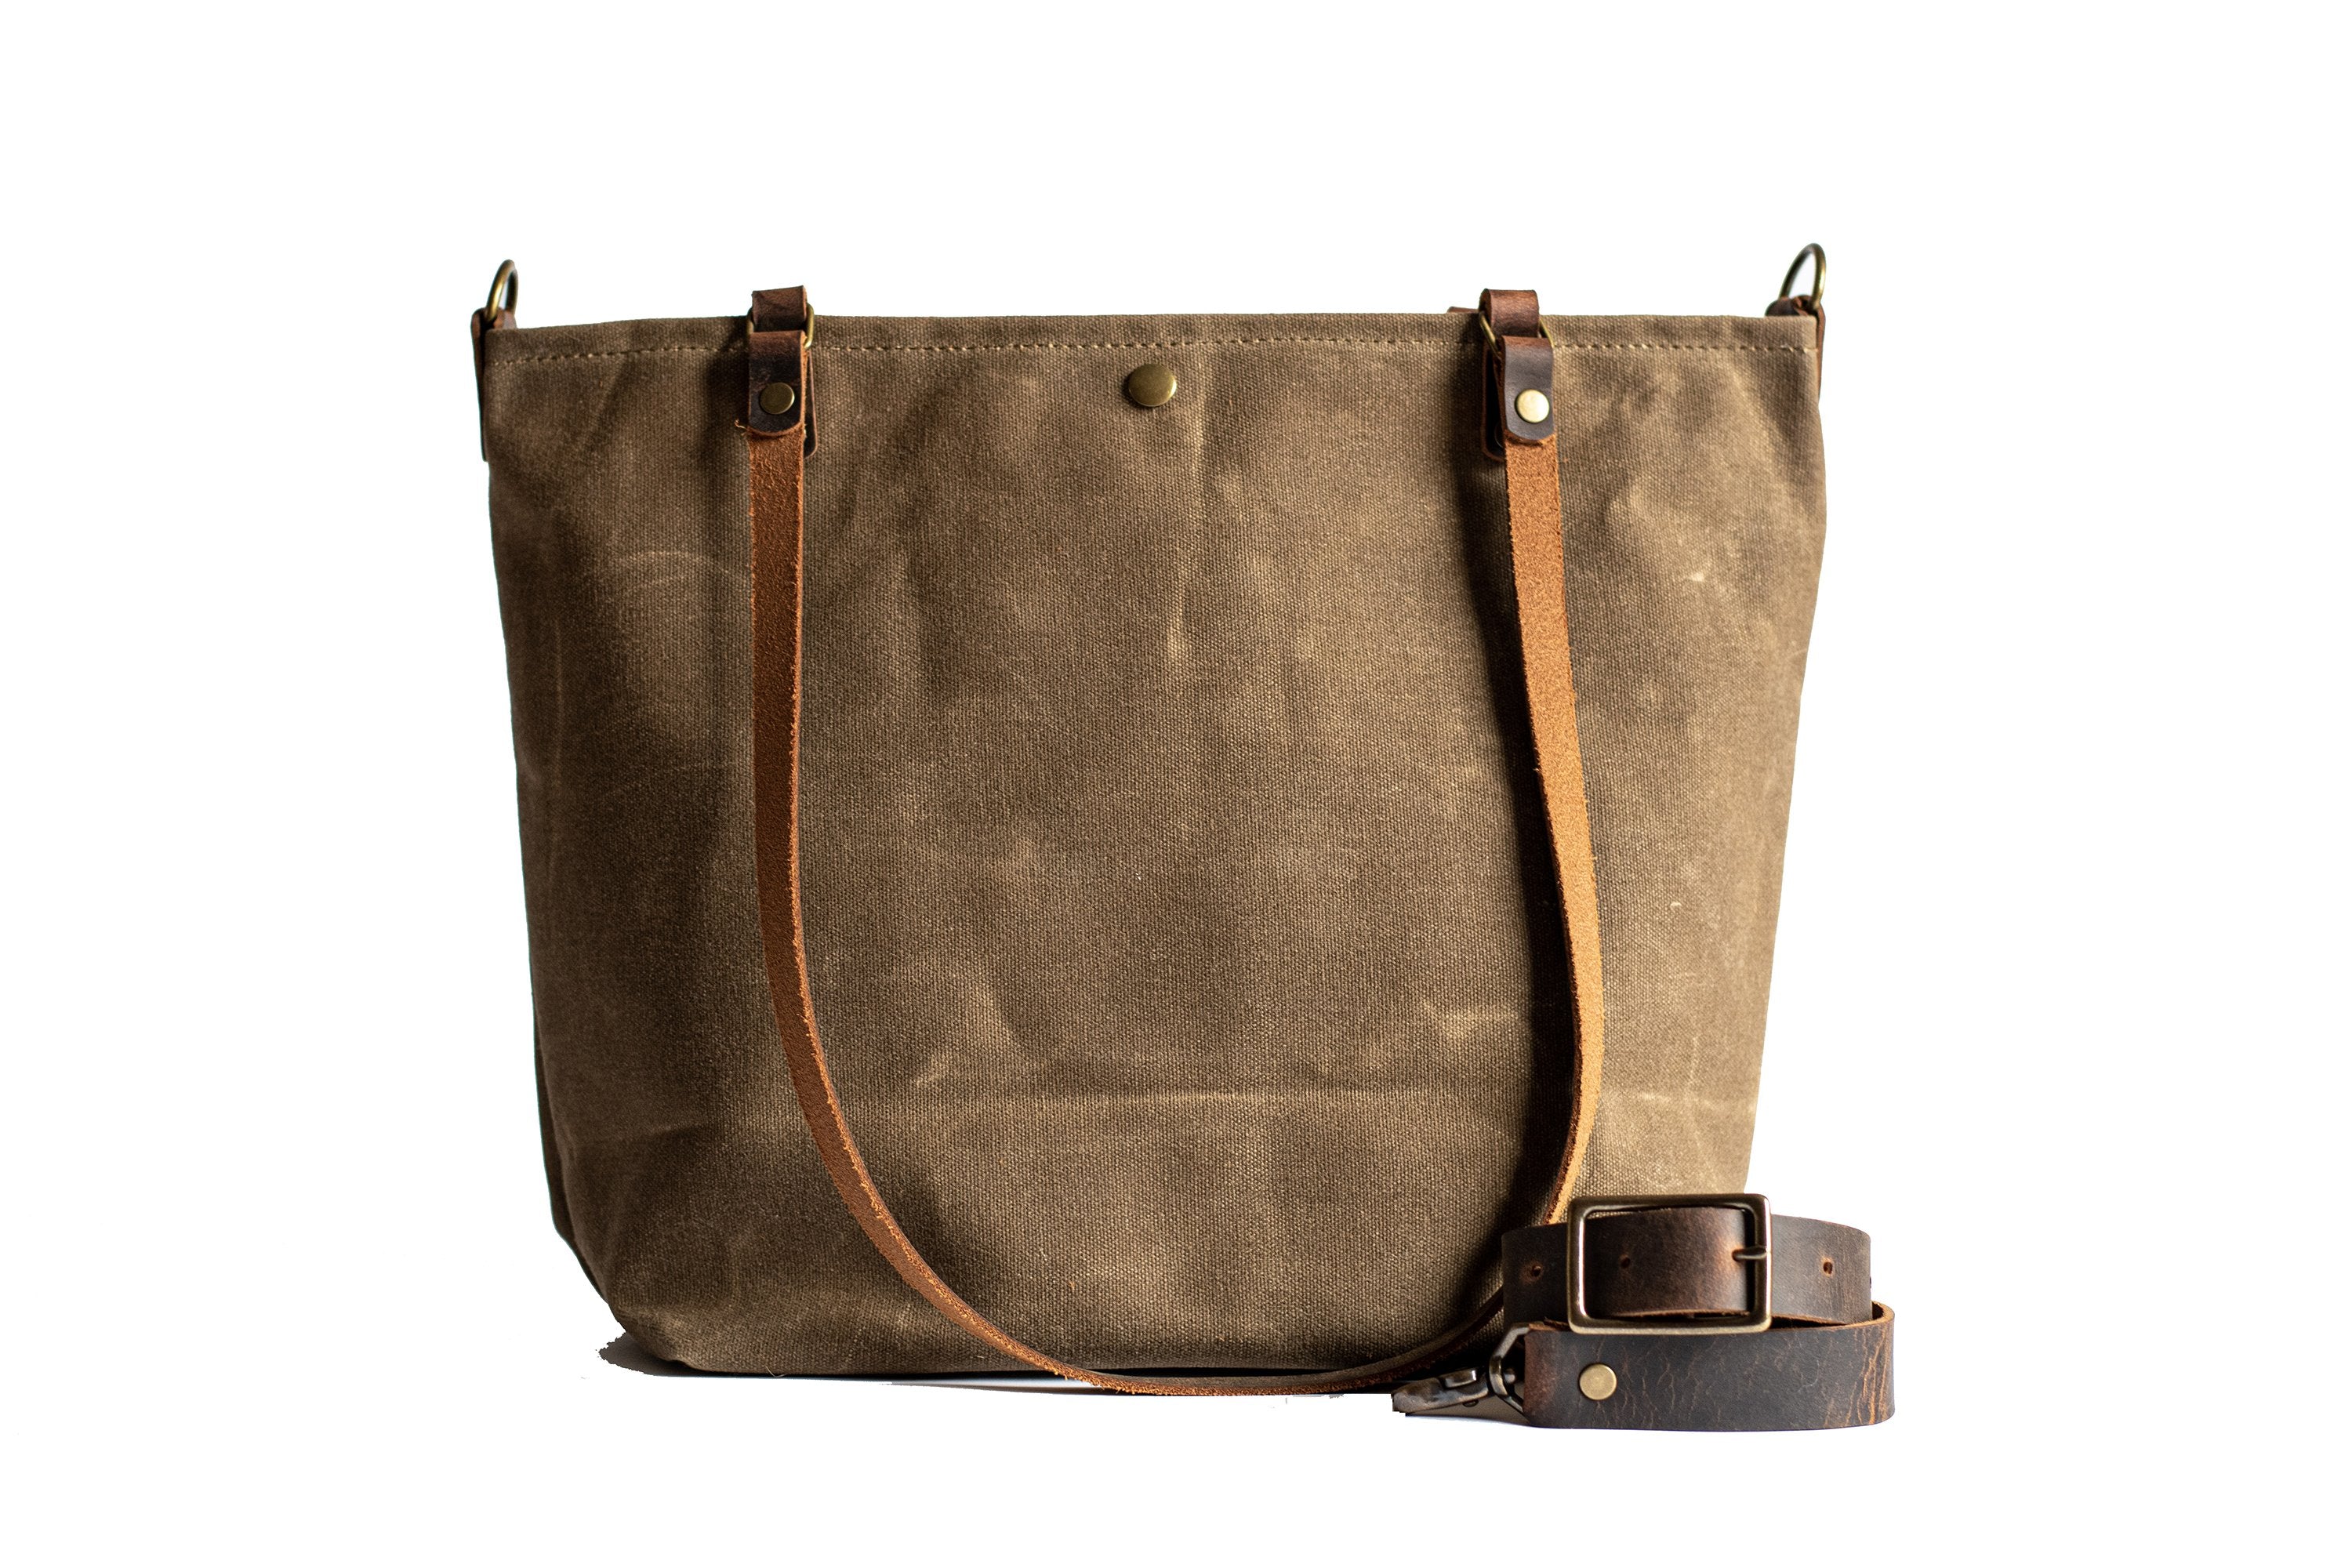 Handmade Waxed Canvas Tote Bag, Lined